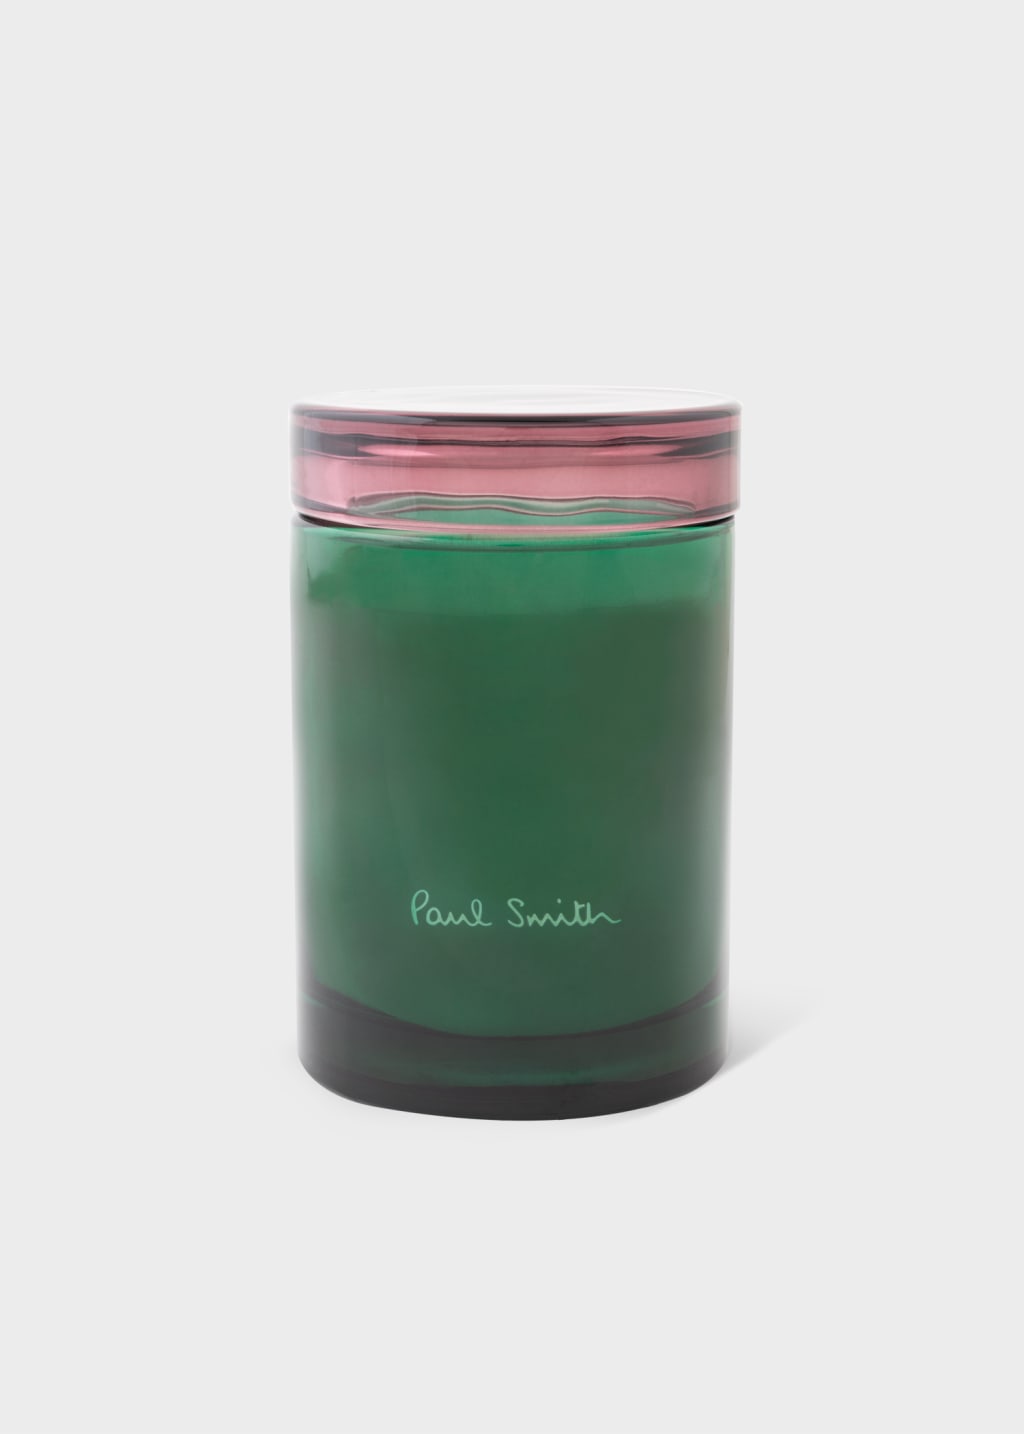 Front View - Paul Smith Botanist Scented Candle, 240g Paul Smith